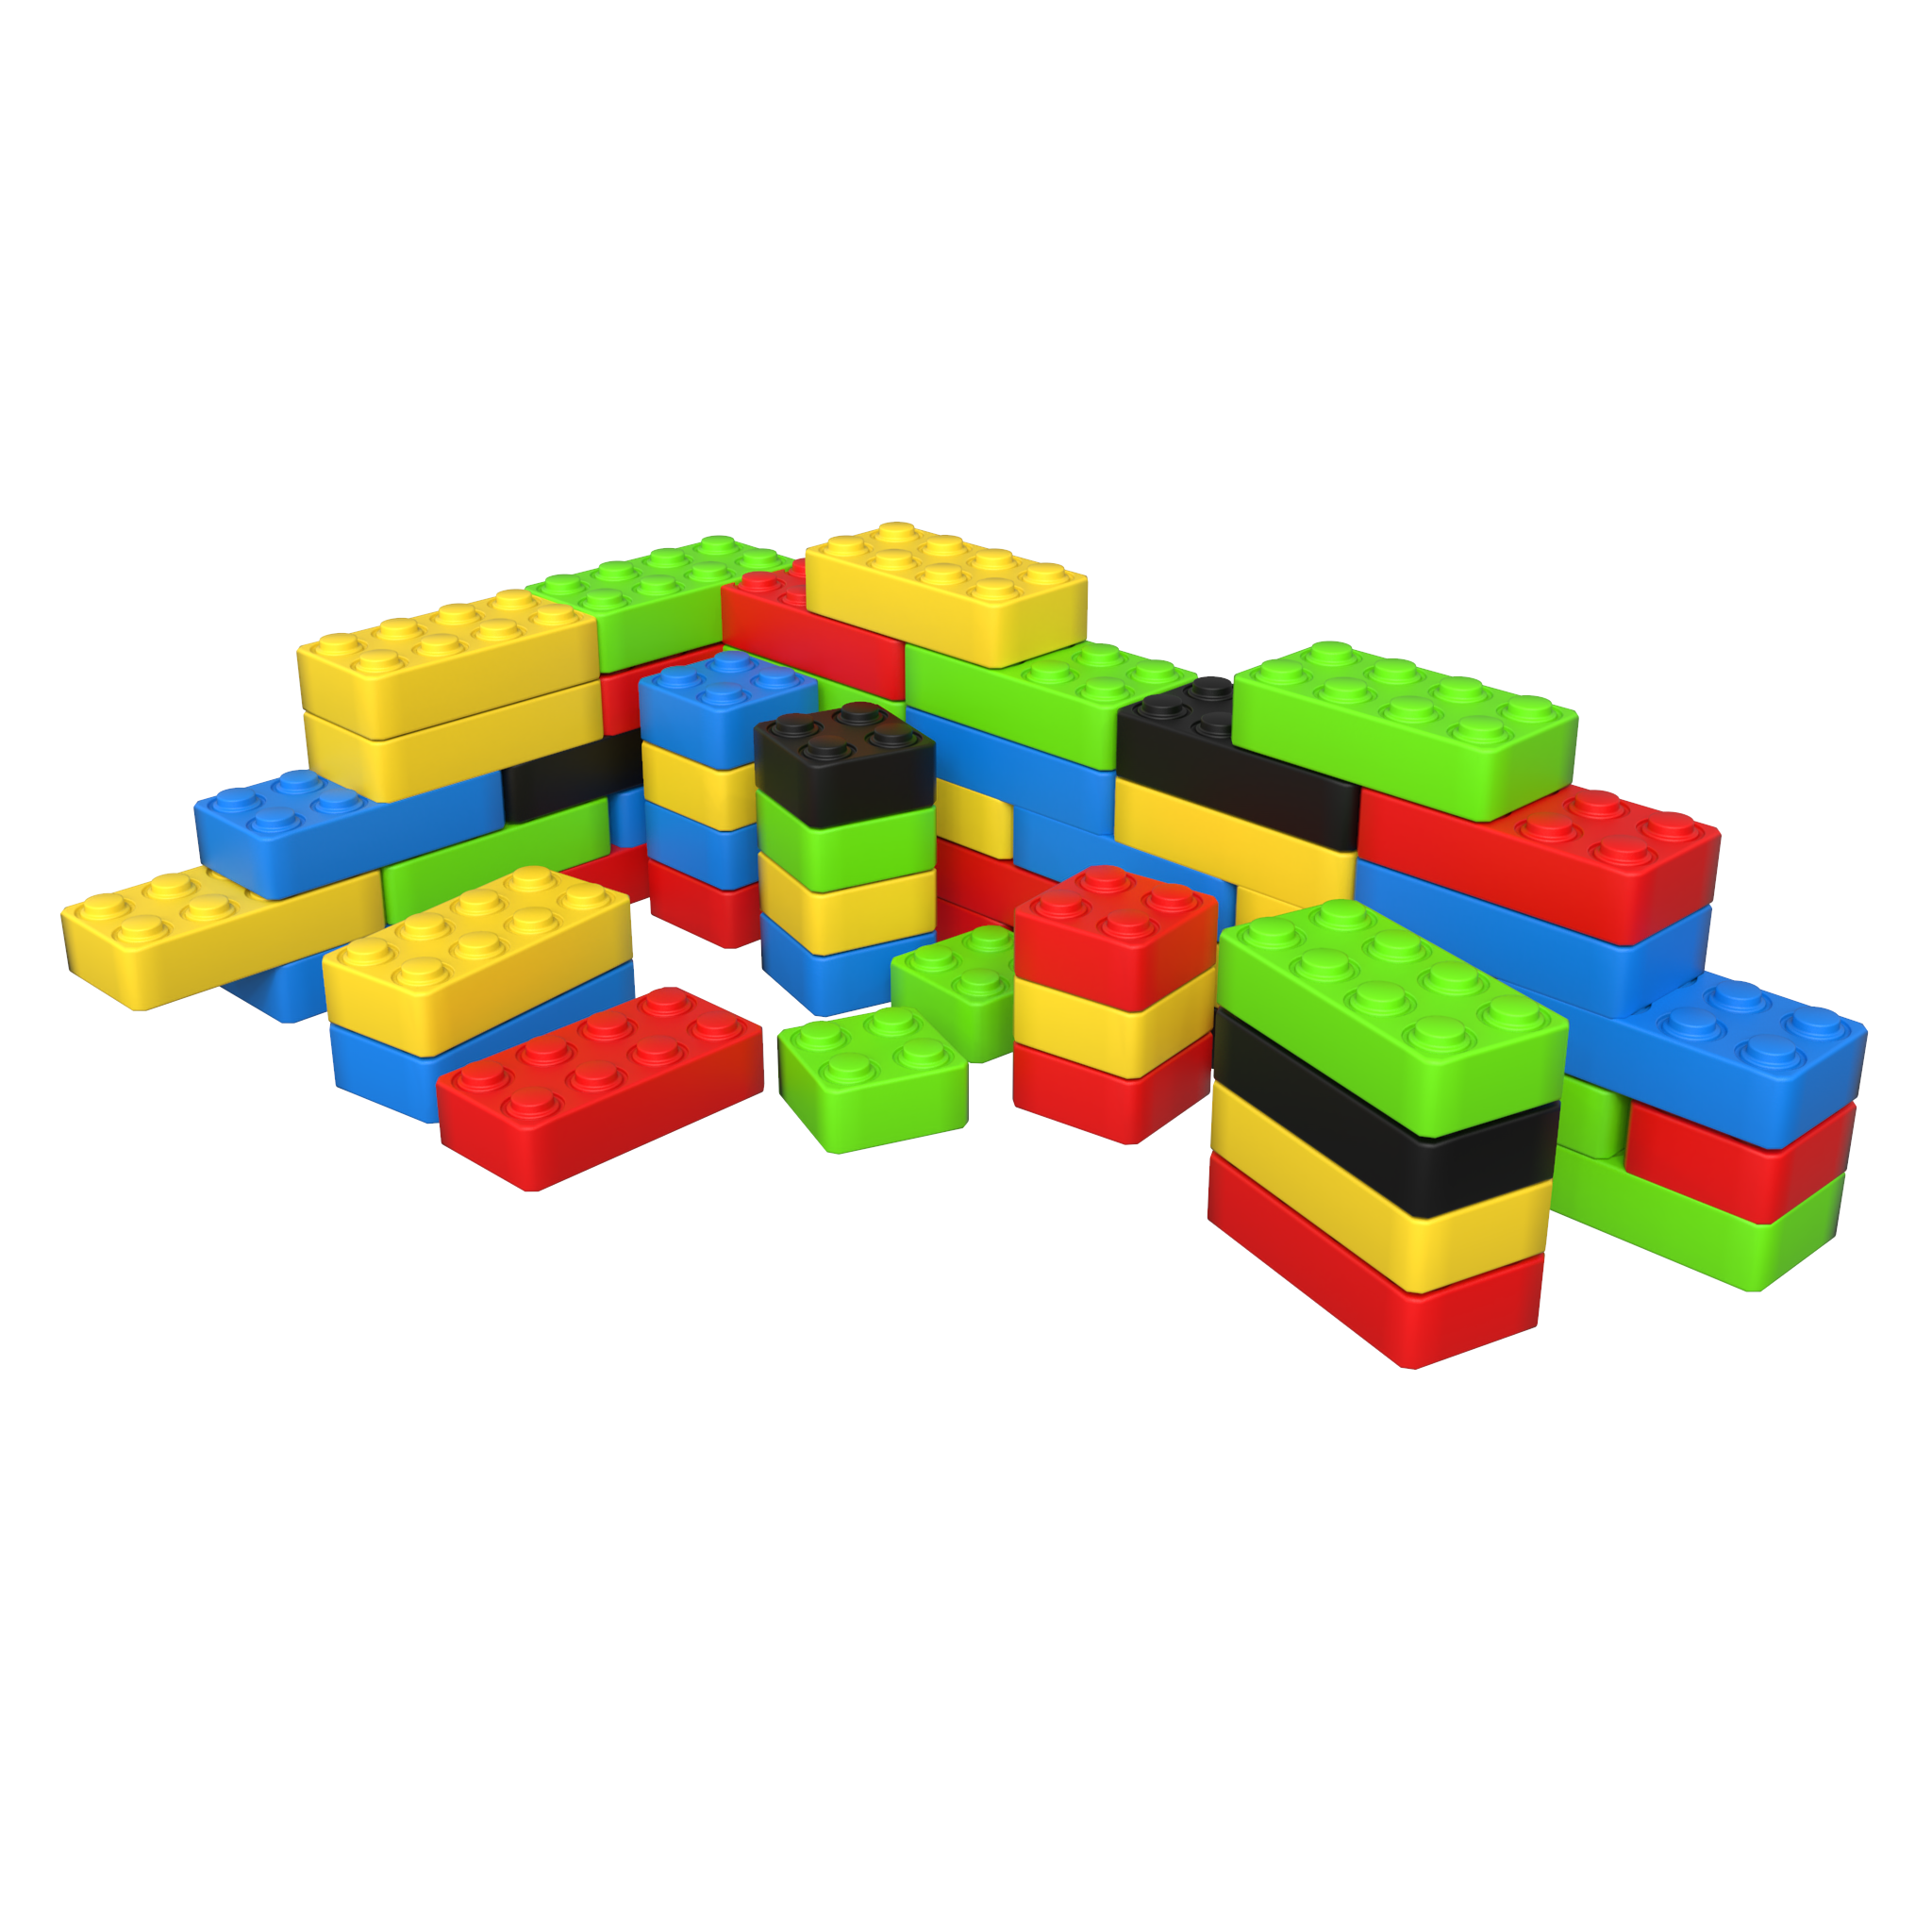 This image shows a Play system Funblocks